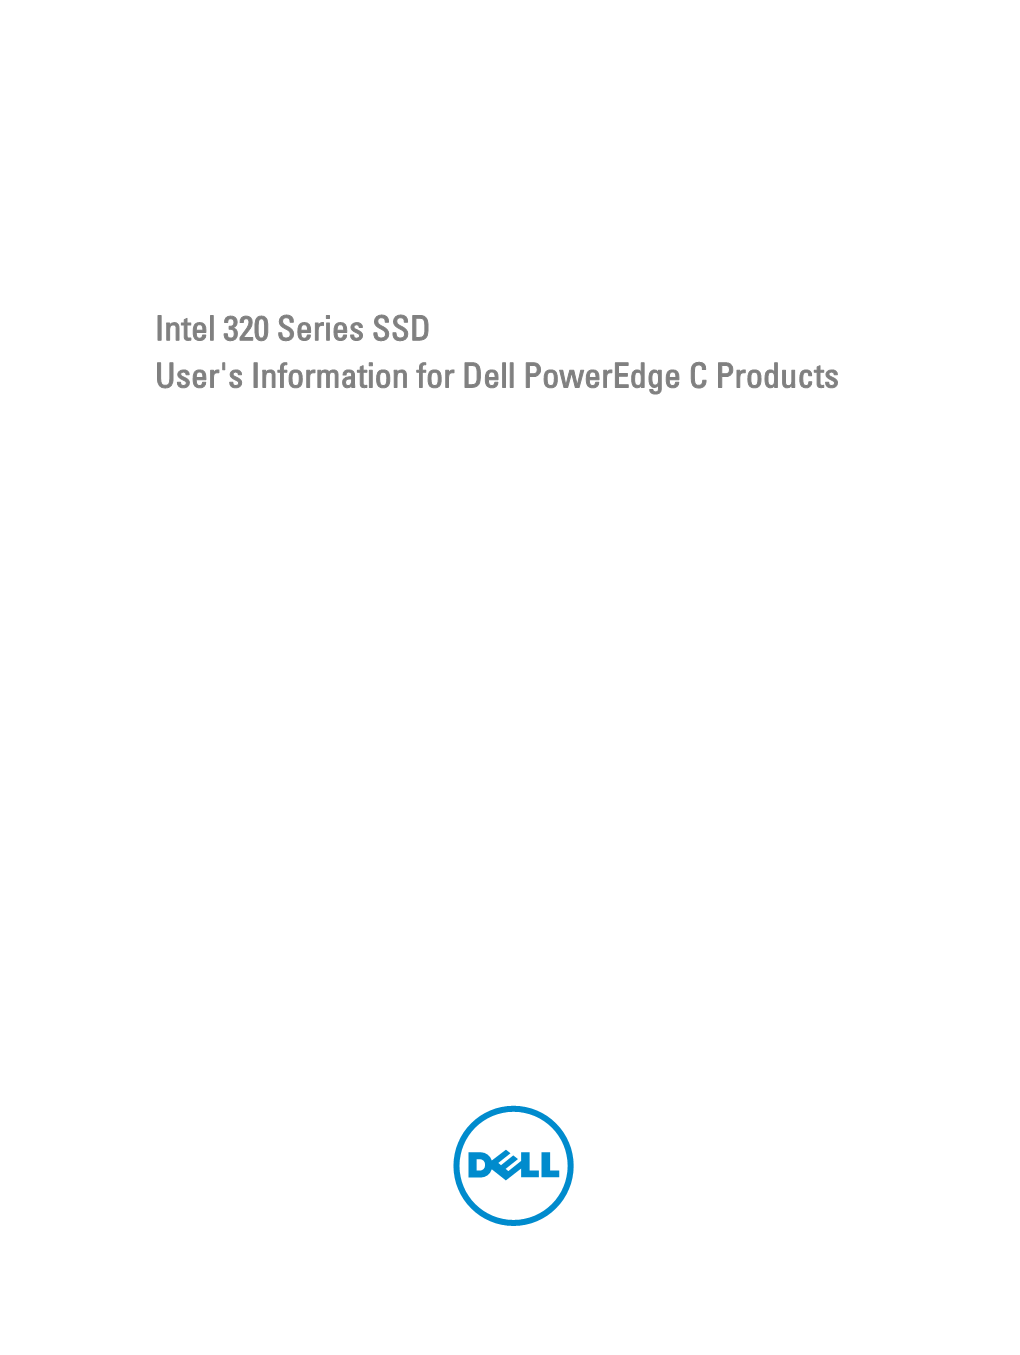 Intel 320 Series SSD User's Information for Dell Poweredge C Products © 2013 Dell Inc